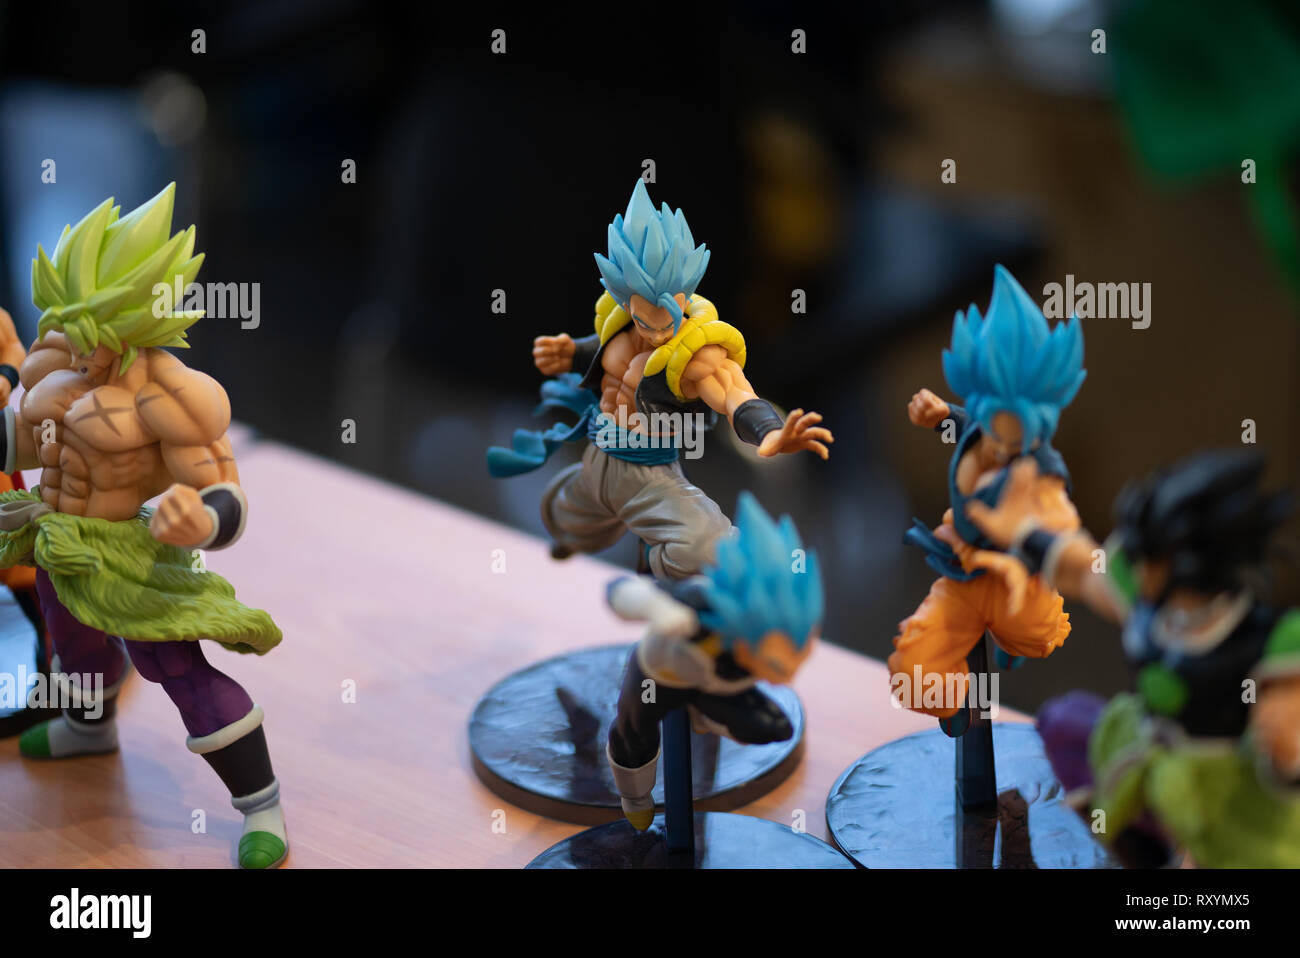 Dragon Ball Z Japanese animation charcter figures on display at Cosplay event,Cebu City,Philippines Stock Photo